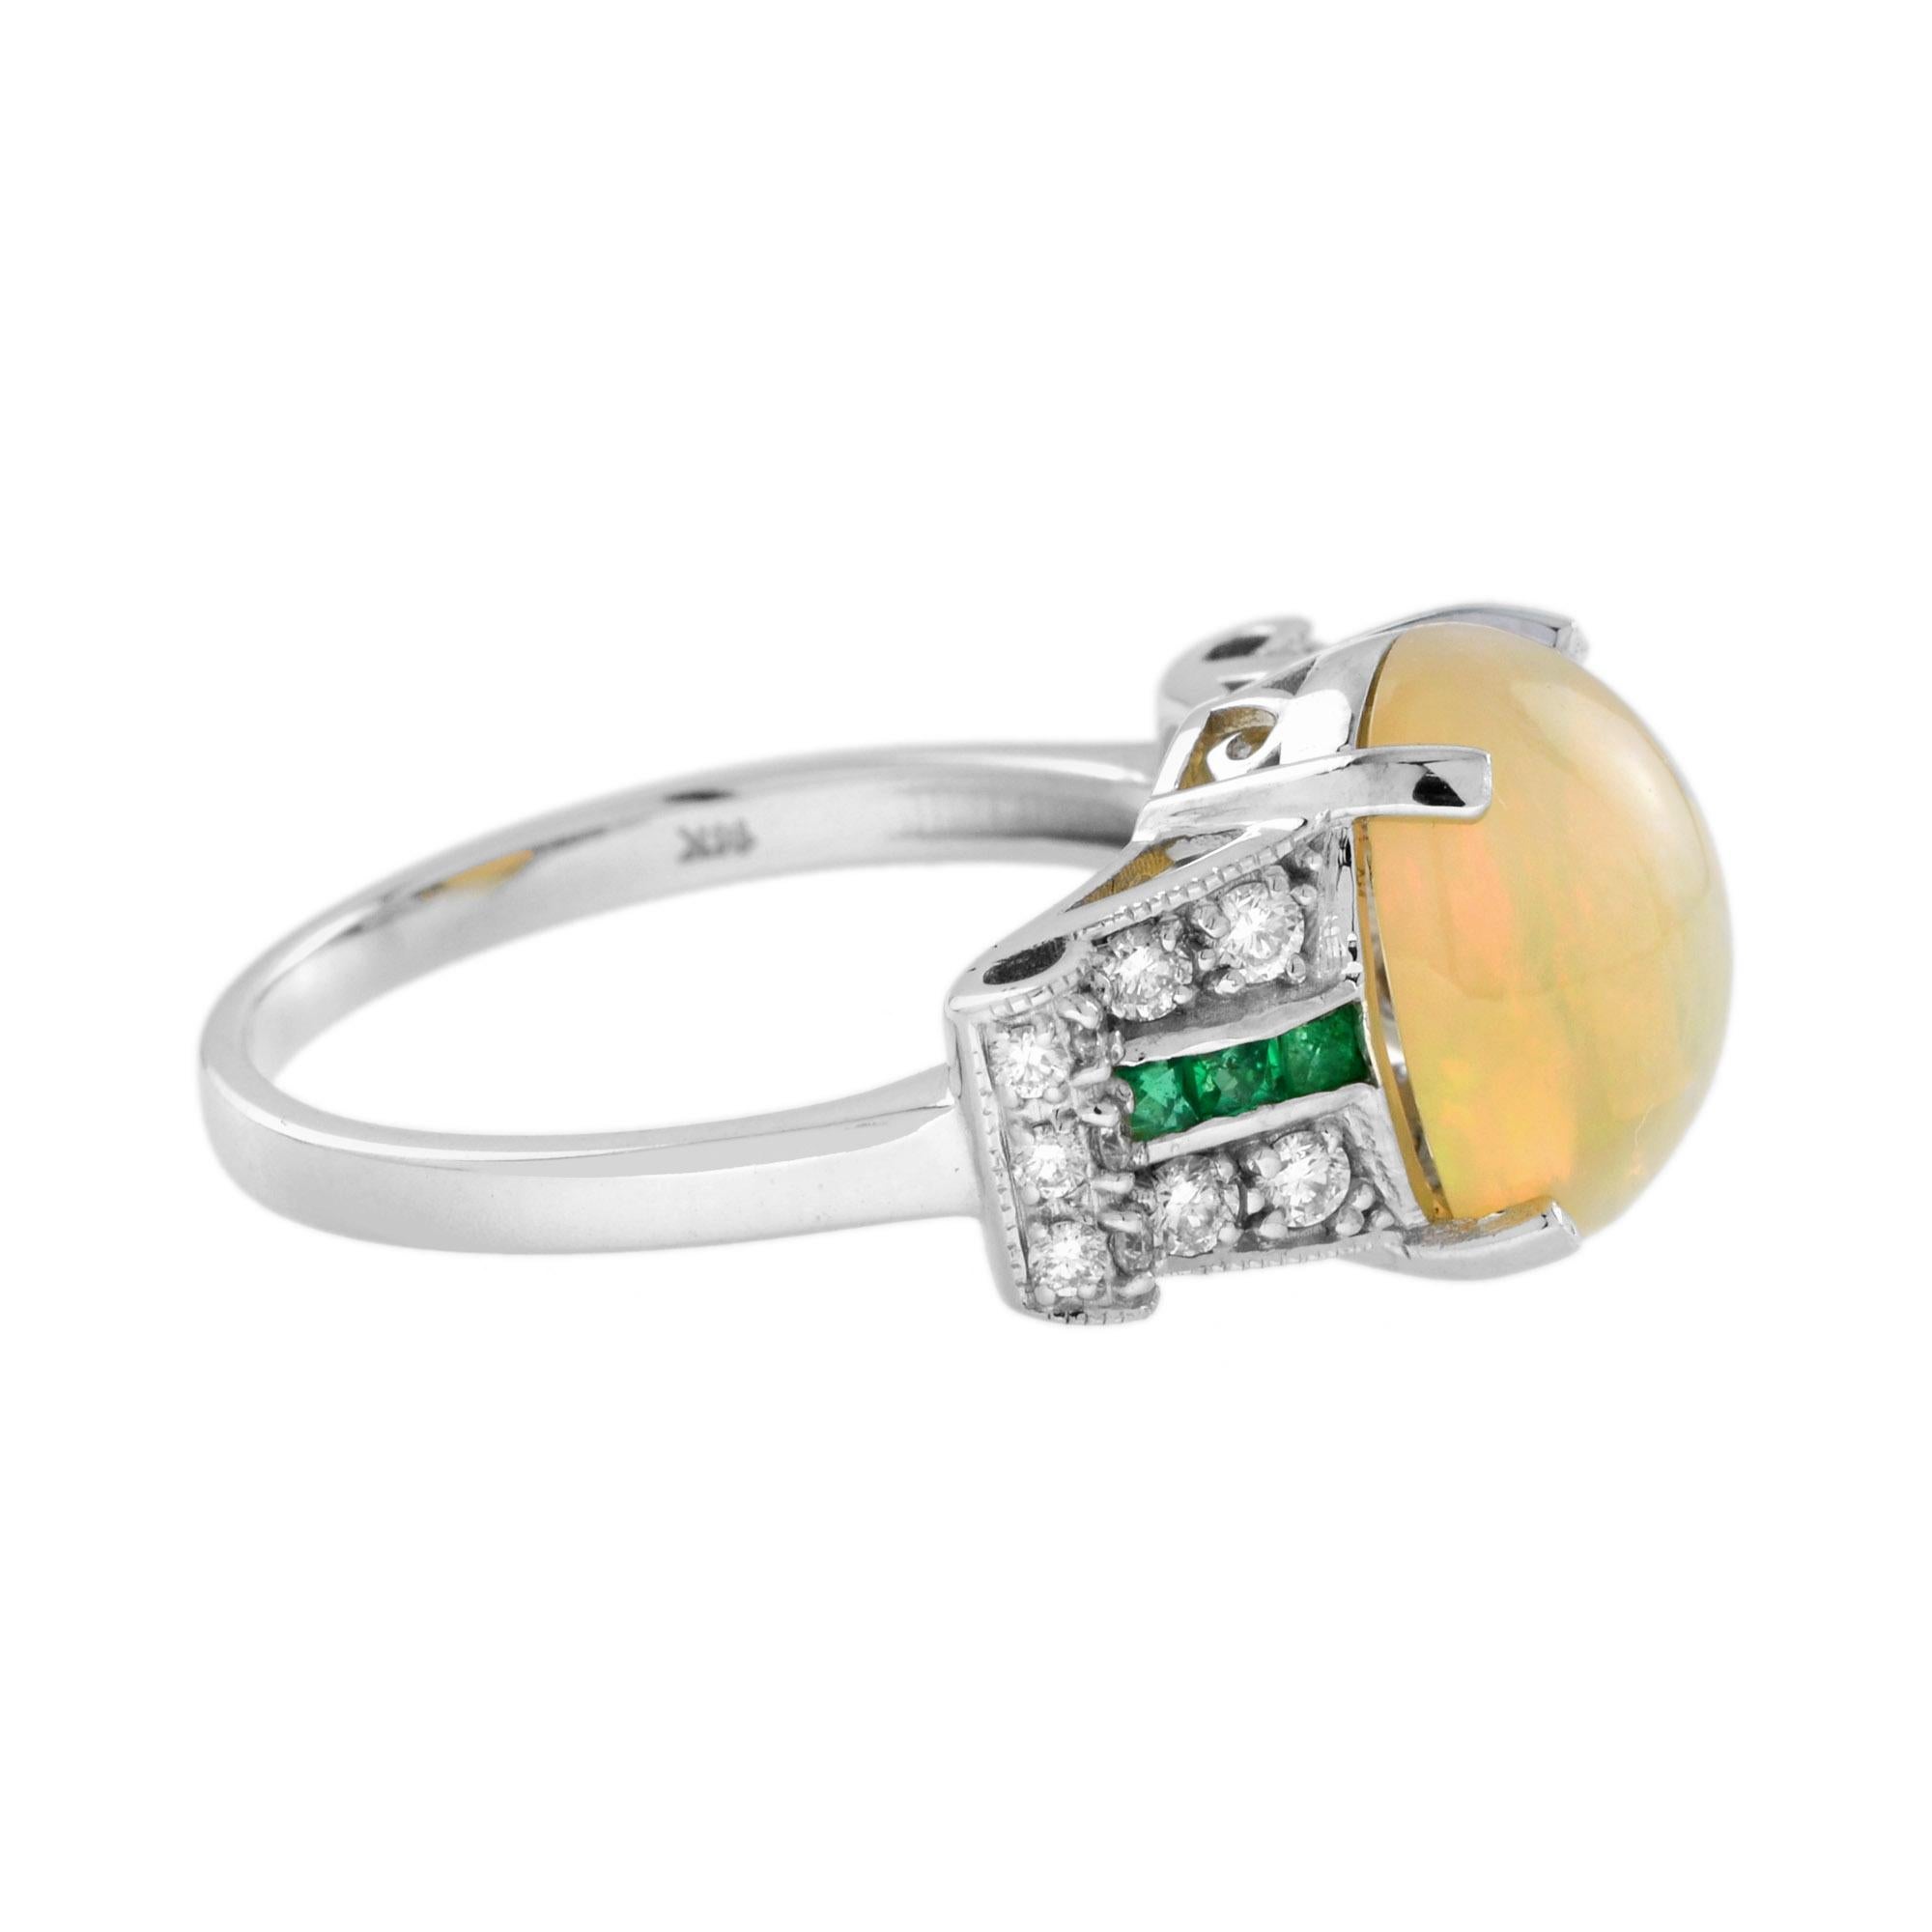 Women's 2.46 Ct. Opal Emerald Diamond Art Deco Style Solitaire Ring in 14K White Gold For Sale